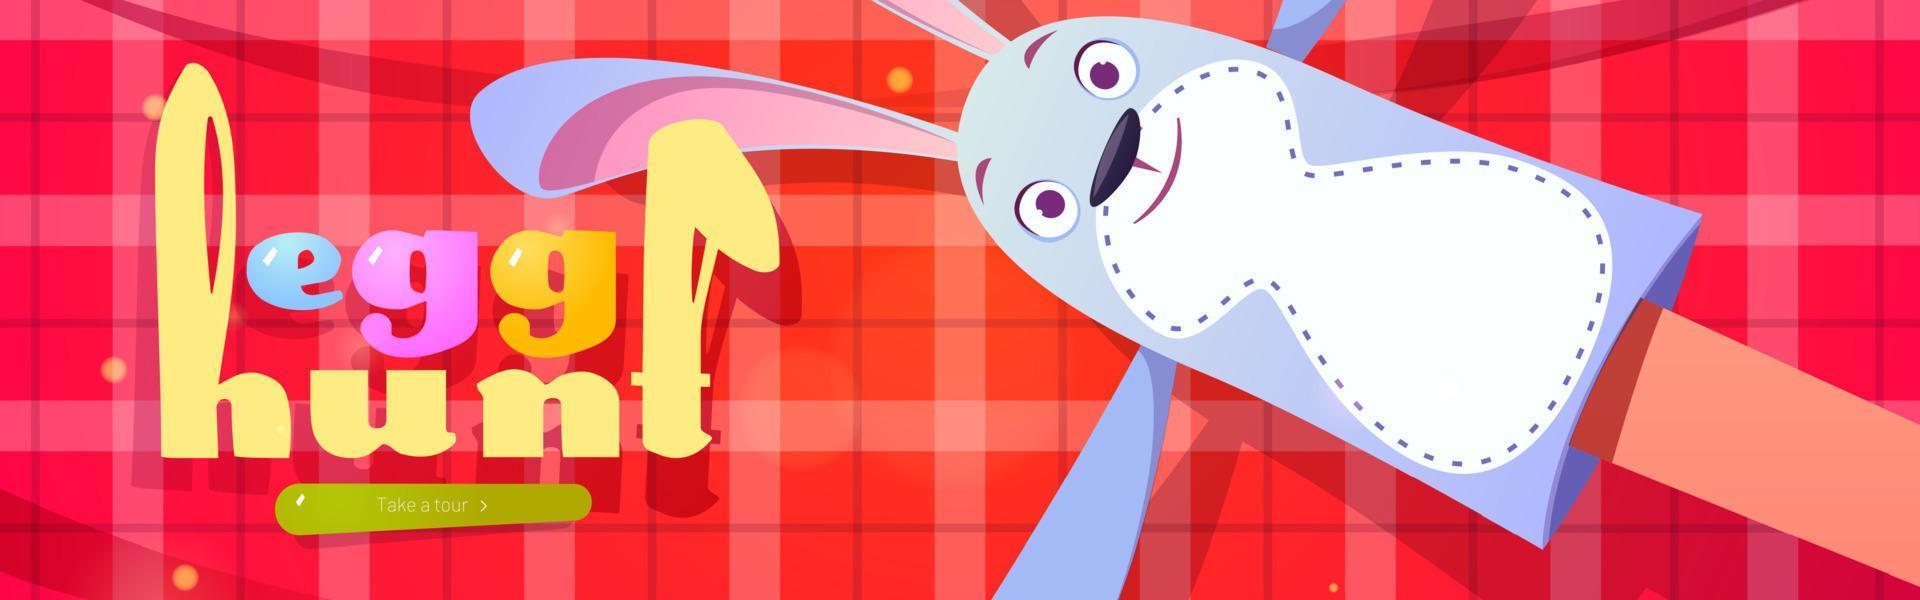 Egg hunt cartoon web banner with funny rabbit toy vector